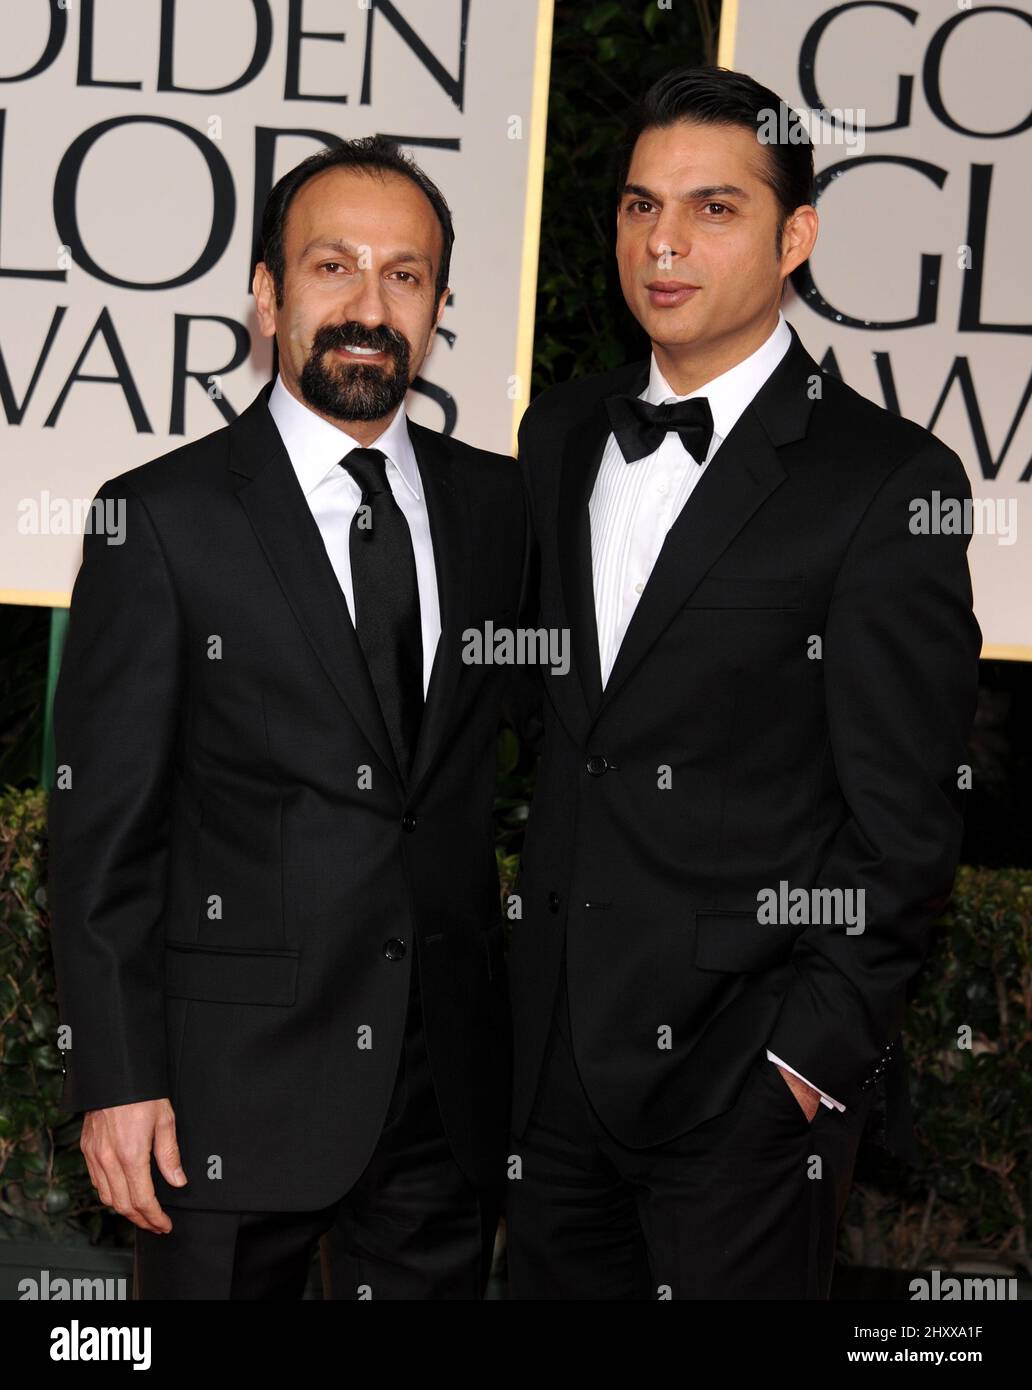 Asghar Farhadi and Payman Maadi at the 69th Annual Golden Globe Awards Ceremony, held at the Beverly Hilton Hotel in Los Angeles, CA on January 15, 2011. Stock Photo